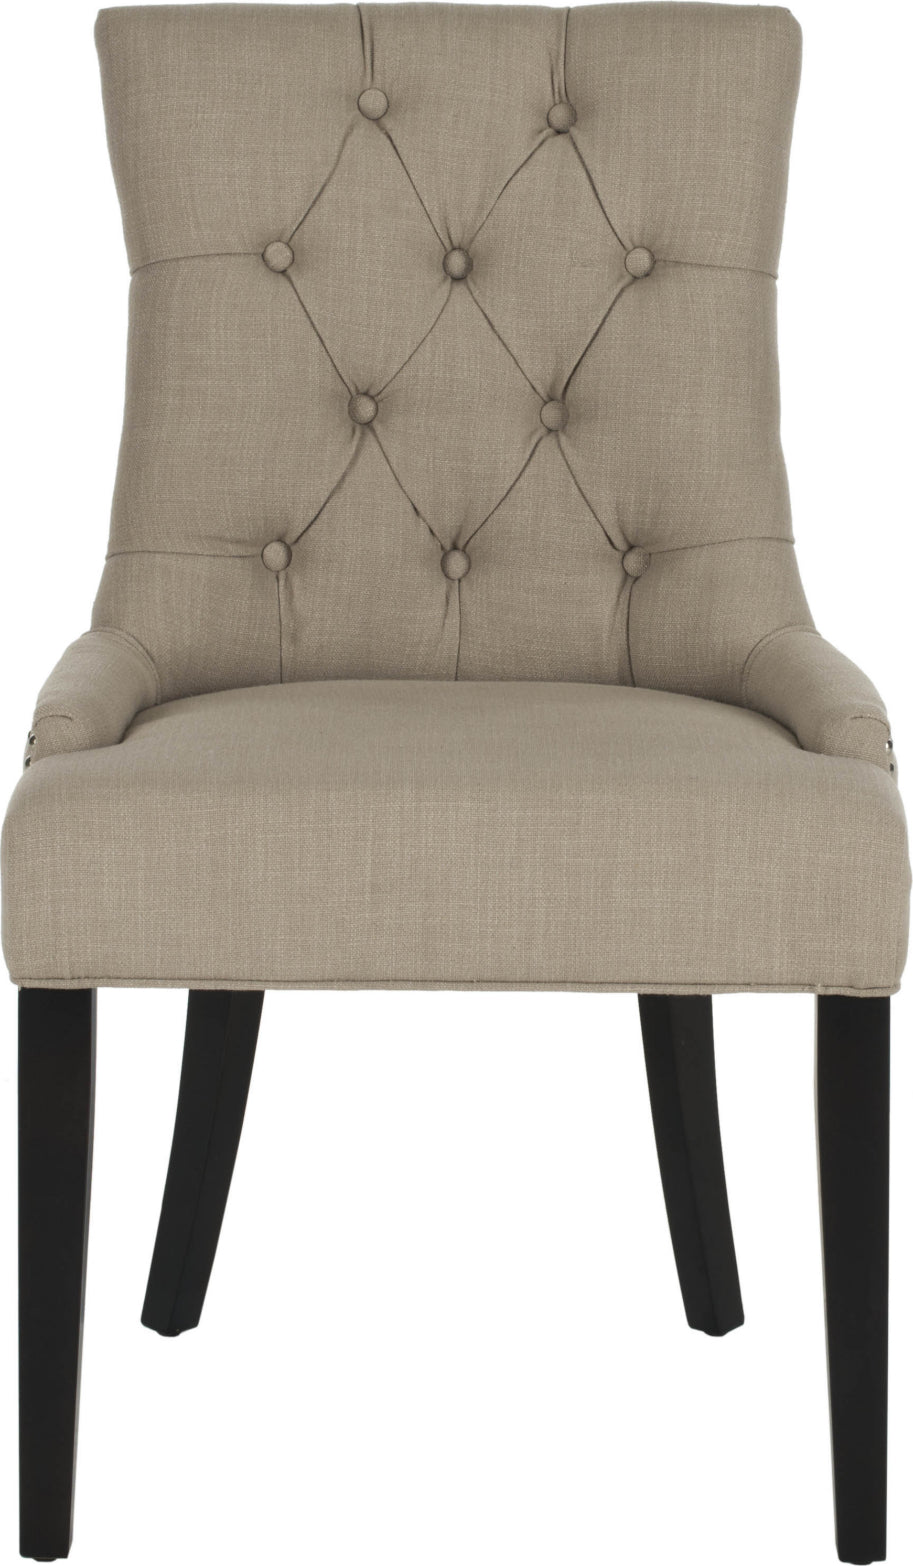 Safavieh Abby 19''H Tufted Side Chairs (SET Of 2) True Taupe and Espresso Furniture main image